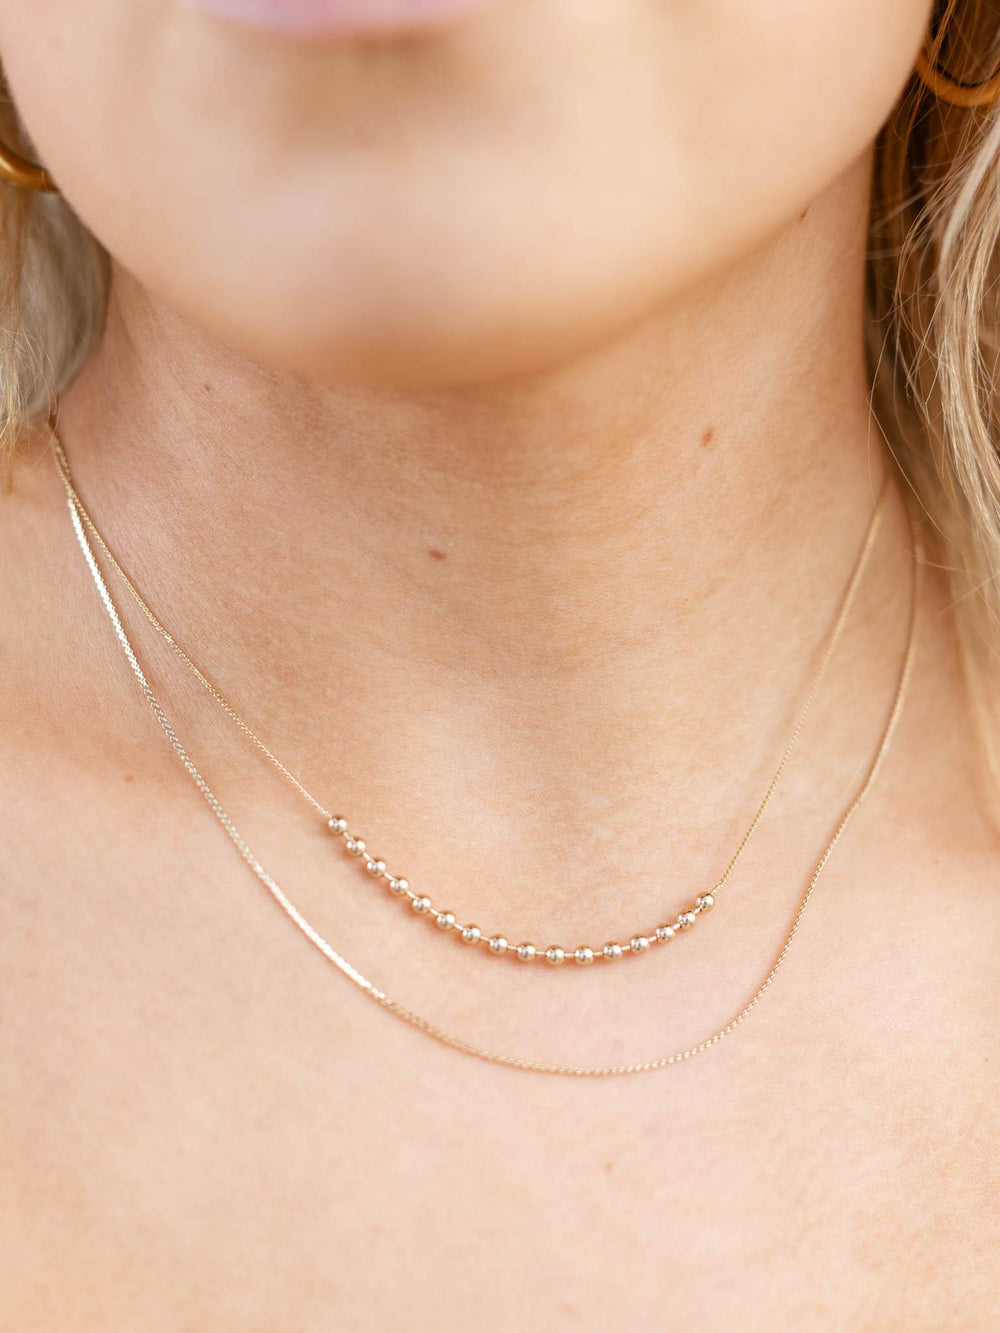 New Prospects-Two Layer Dainty Necklace - Leela and Lavender